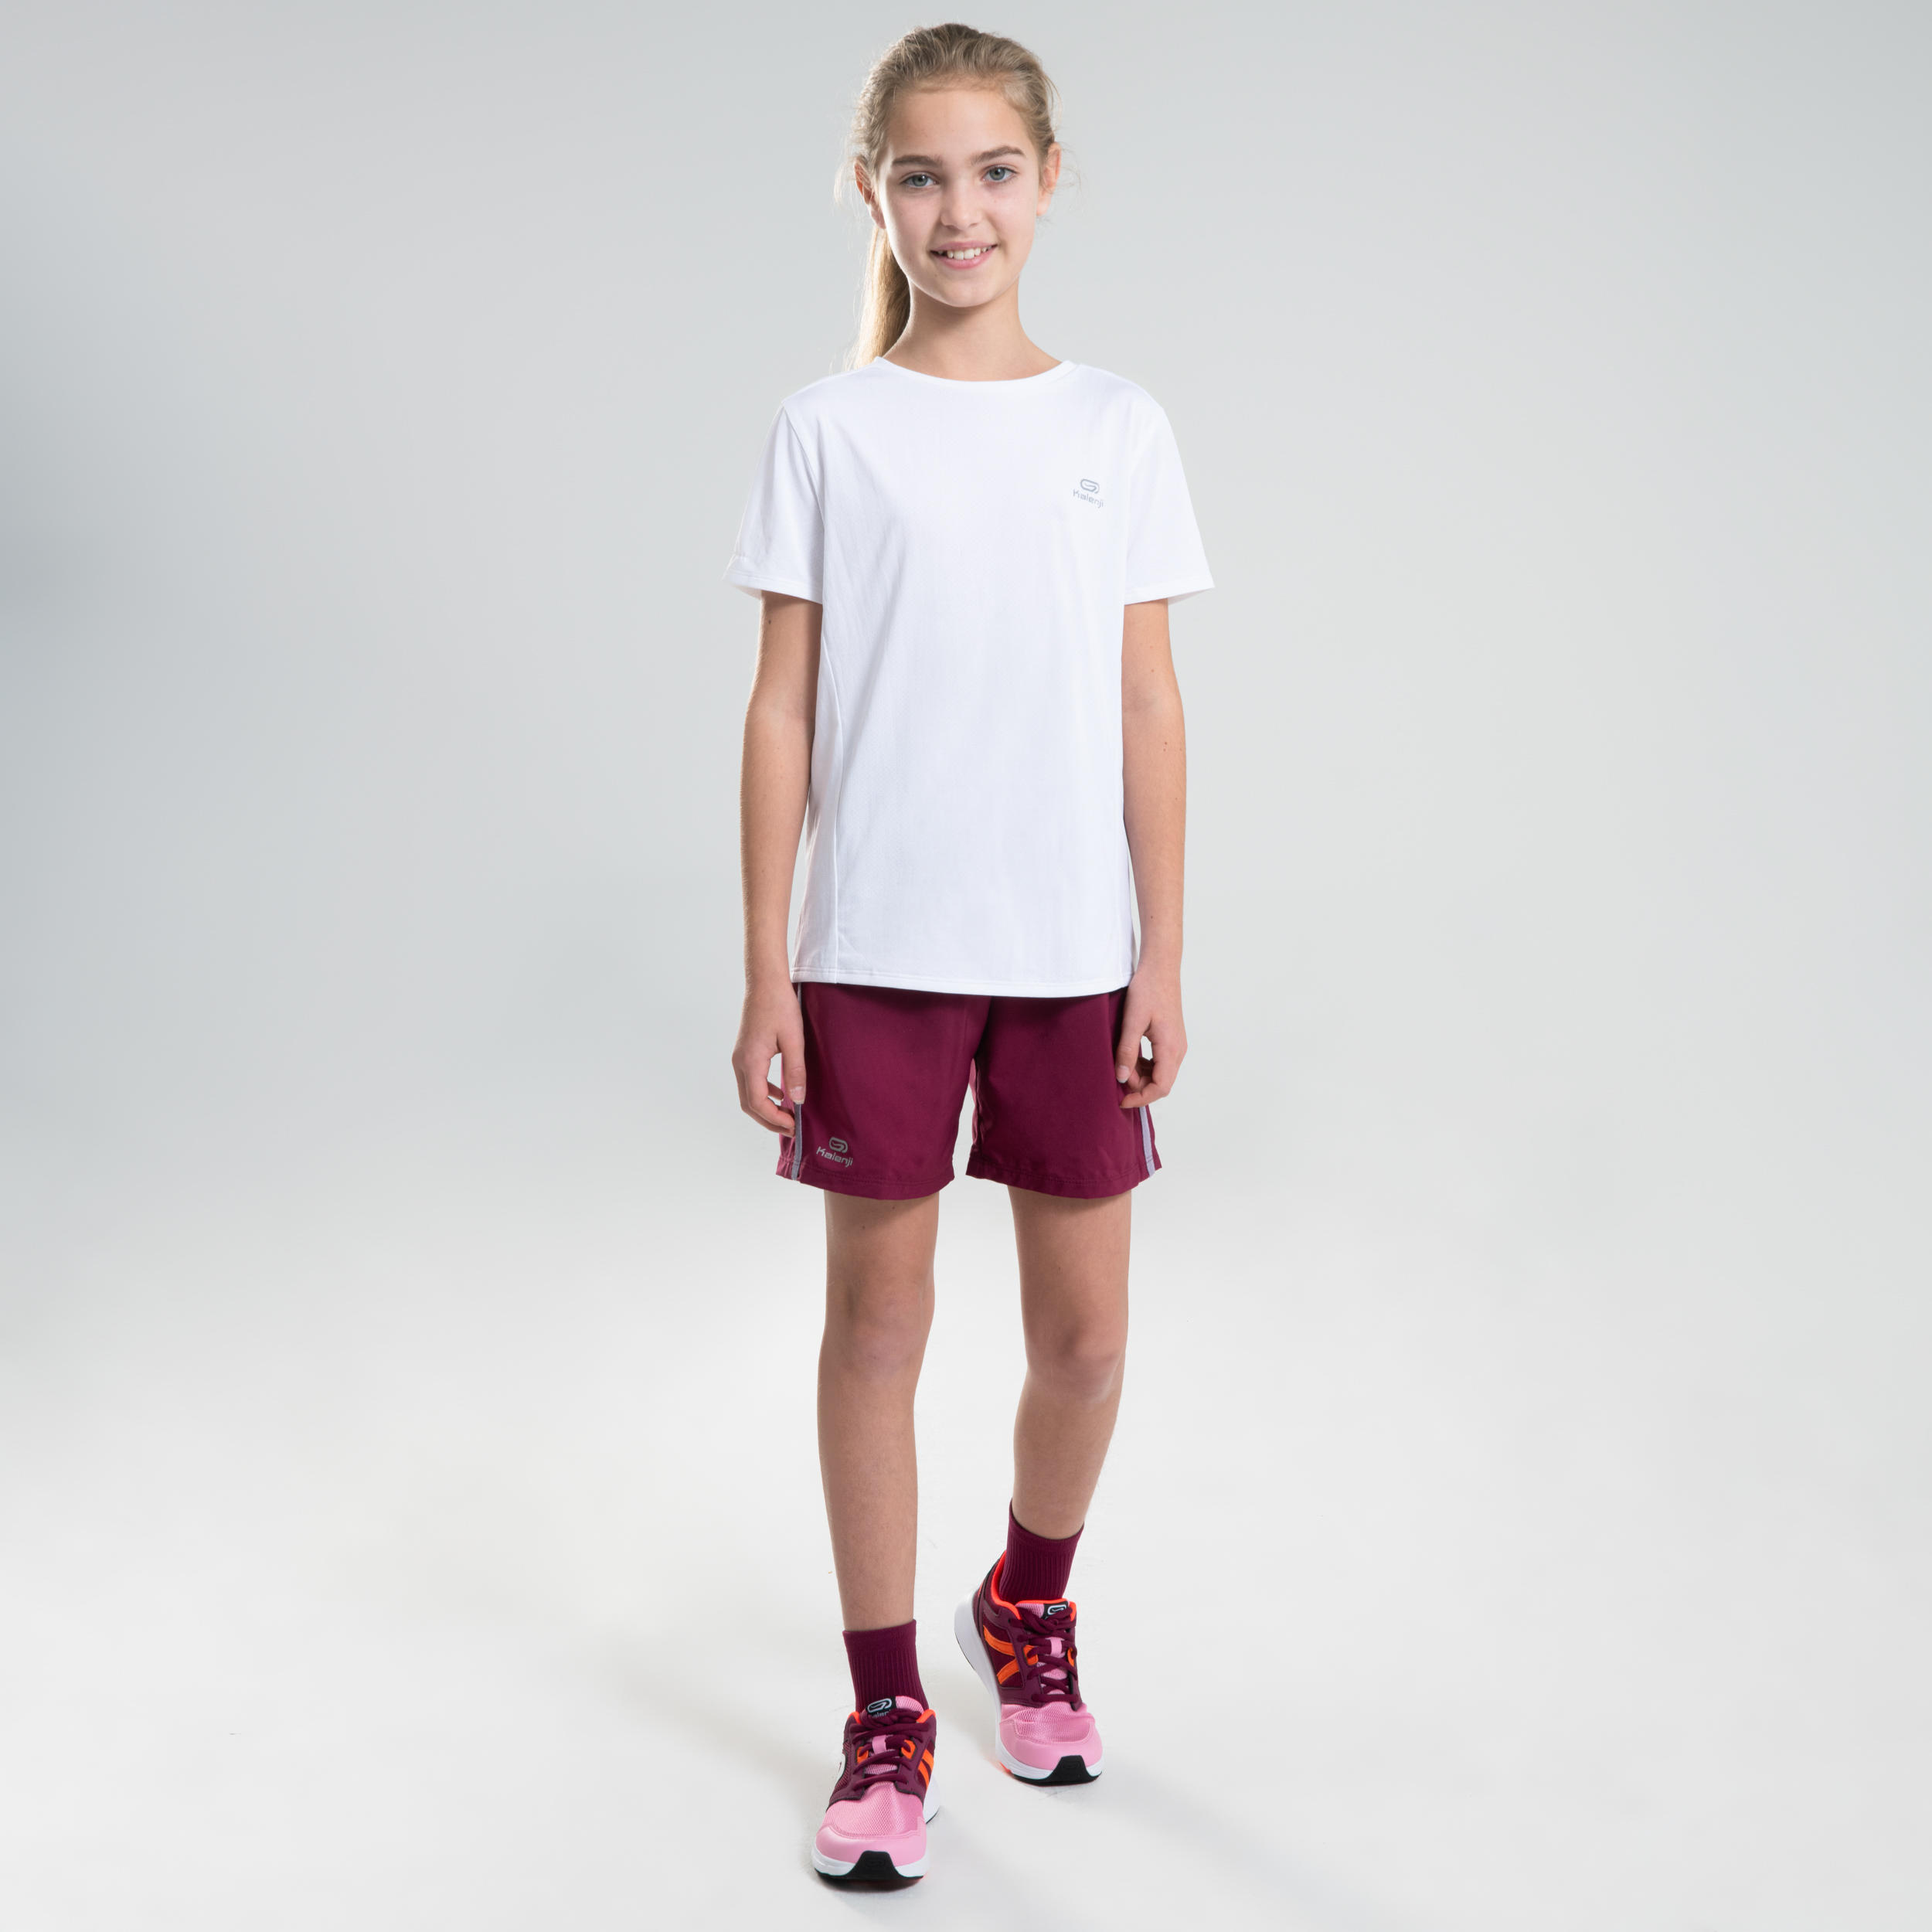 Kids' Breathable T-Shirt 8/8